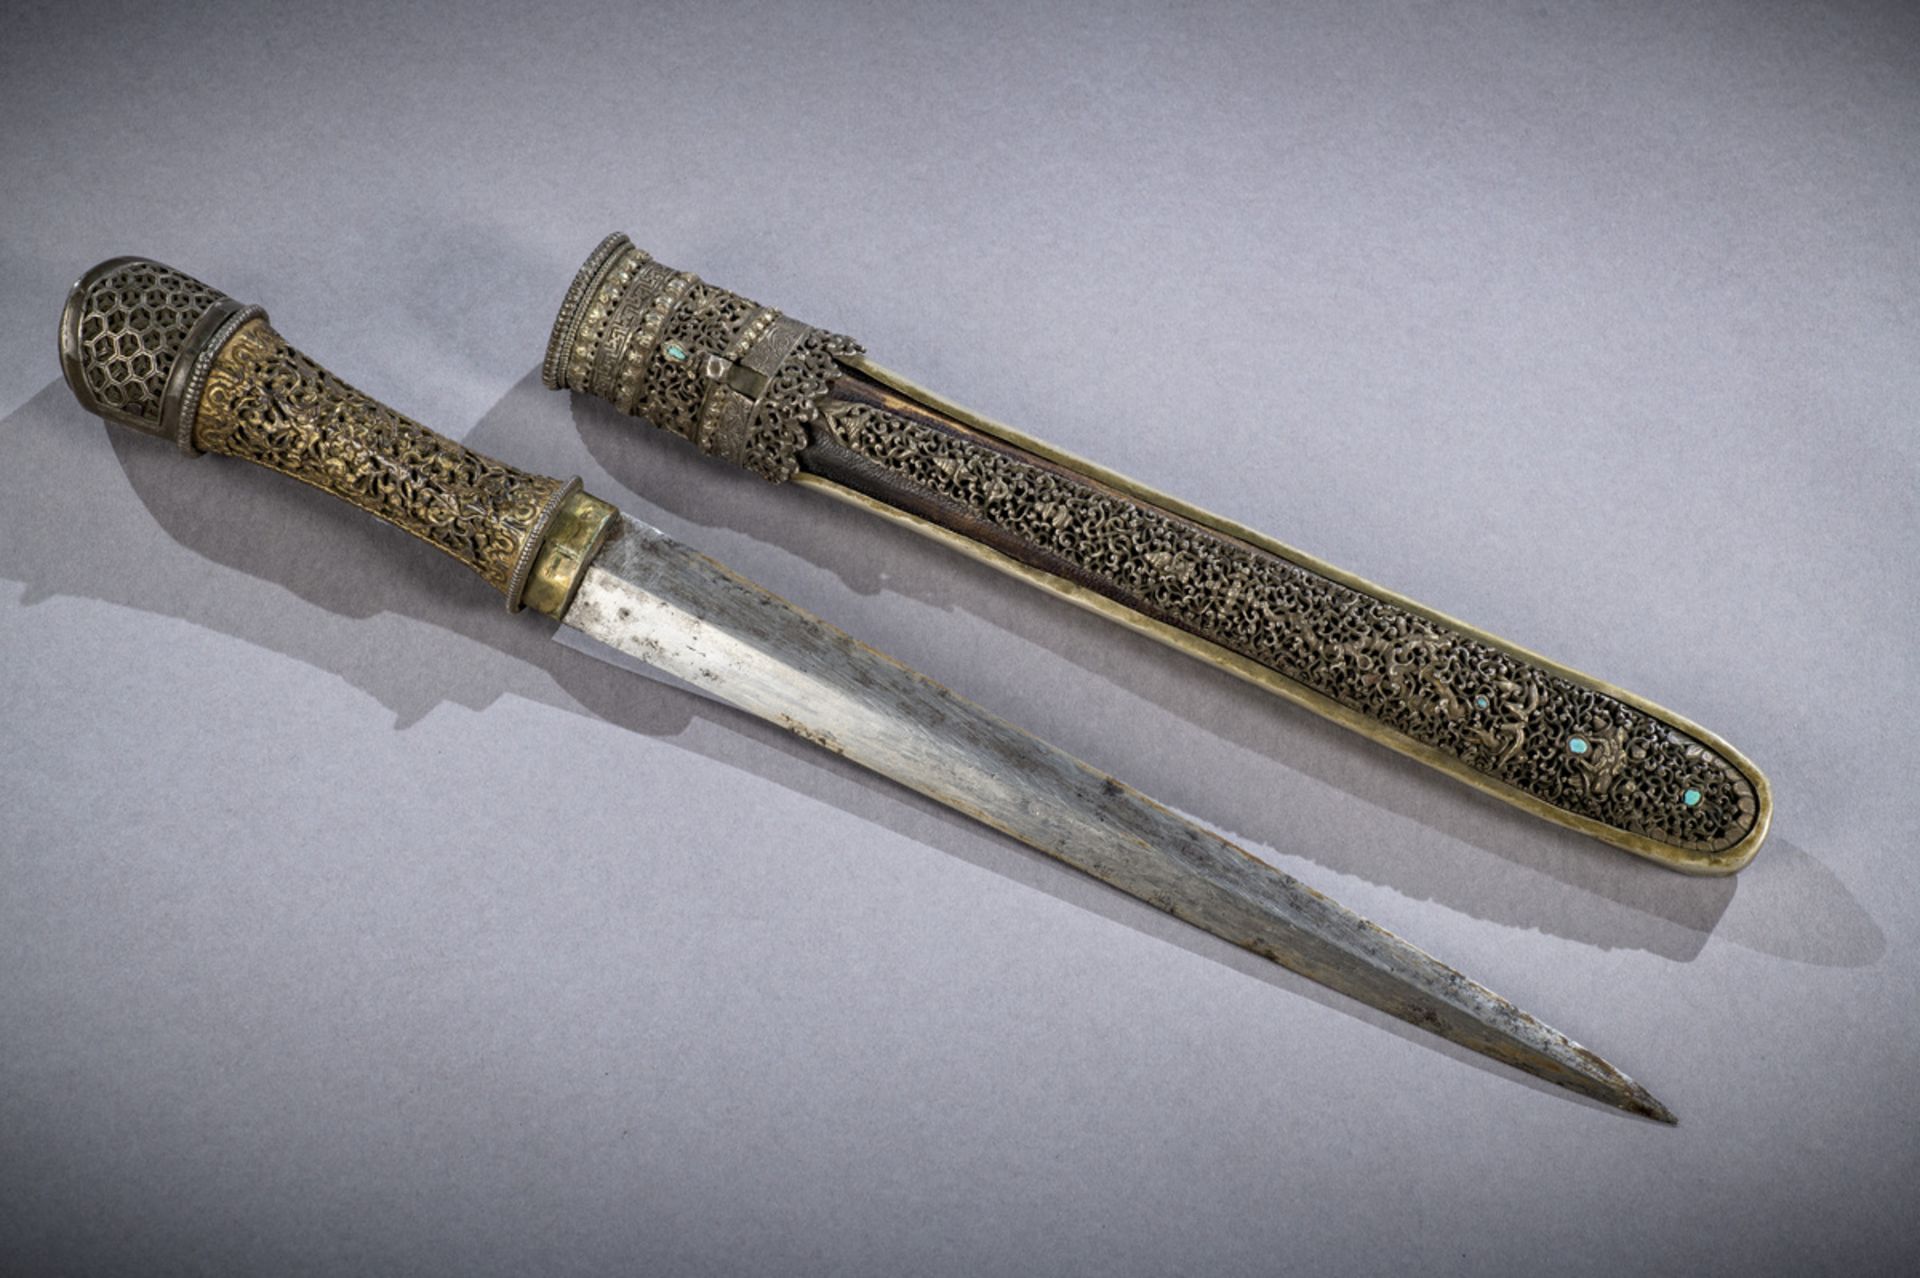 A dagger with openwork iron and gilt bronze decoration, Bhutan 18th - 19th century (tot 46.5 cm) - Image 2 of 7